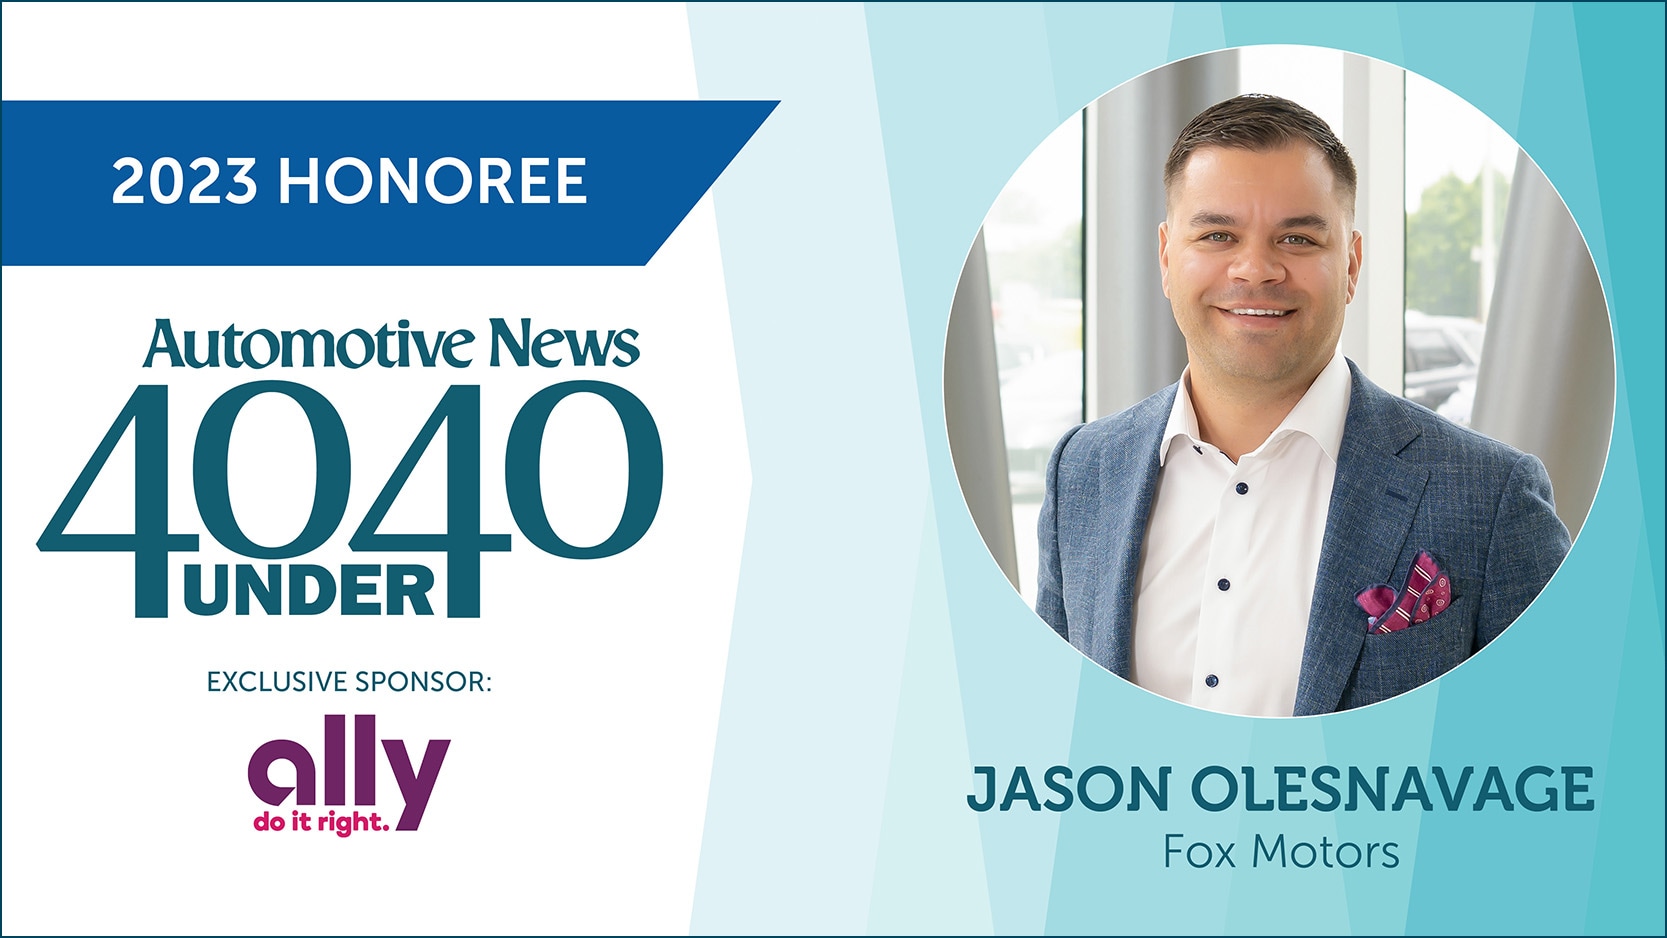 Fox Motors Division Director, Jason Olesnavage Named One of Automotive